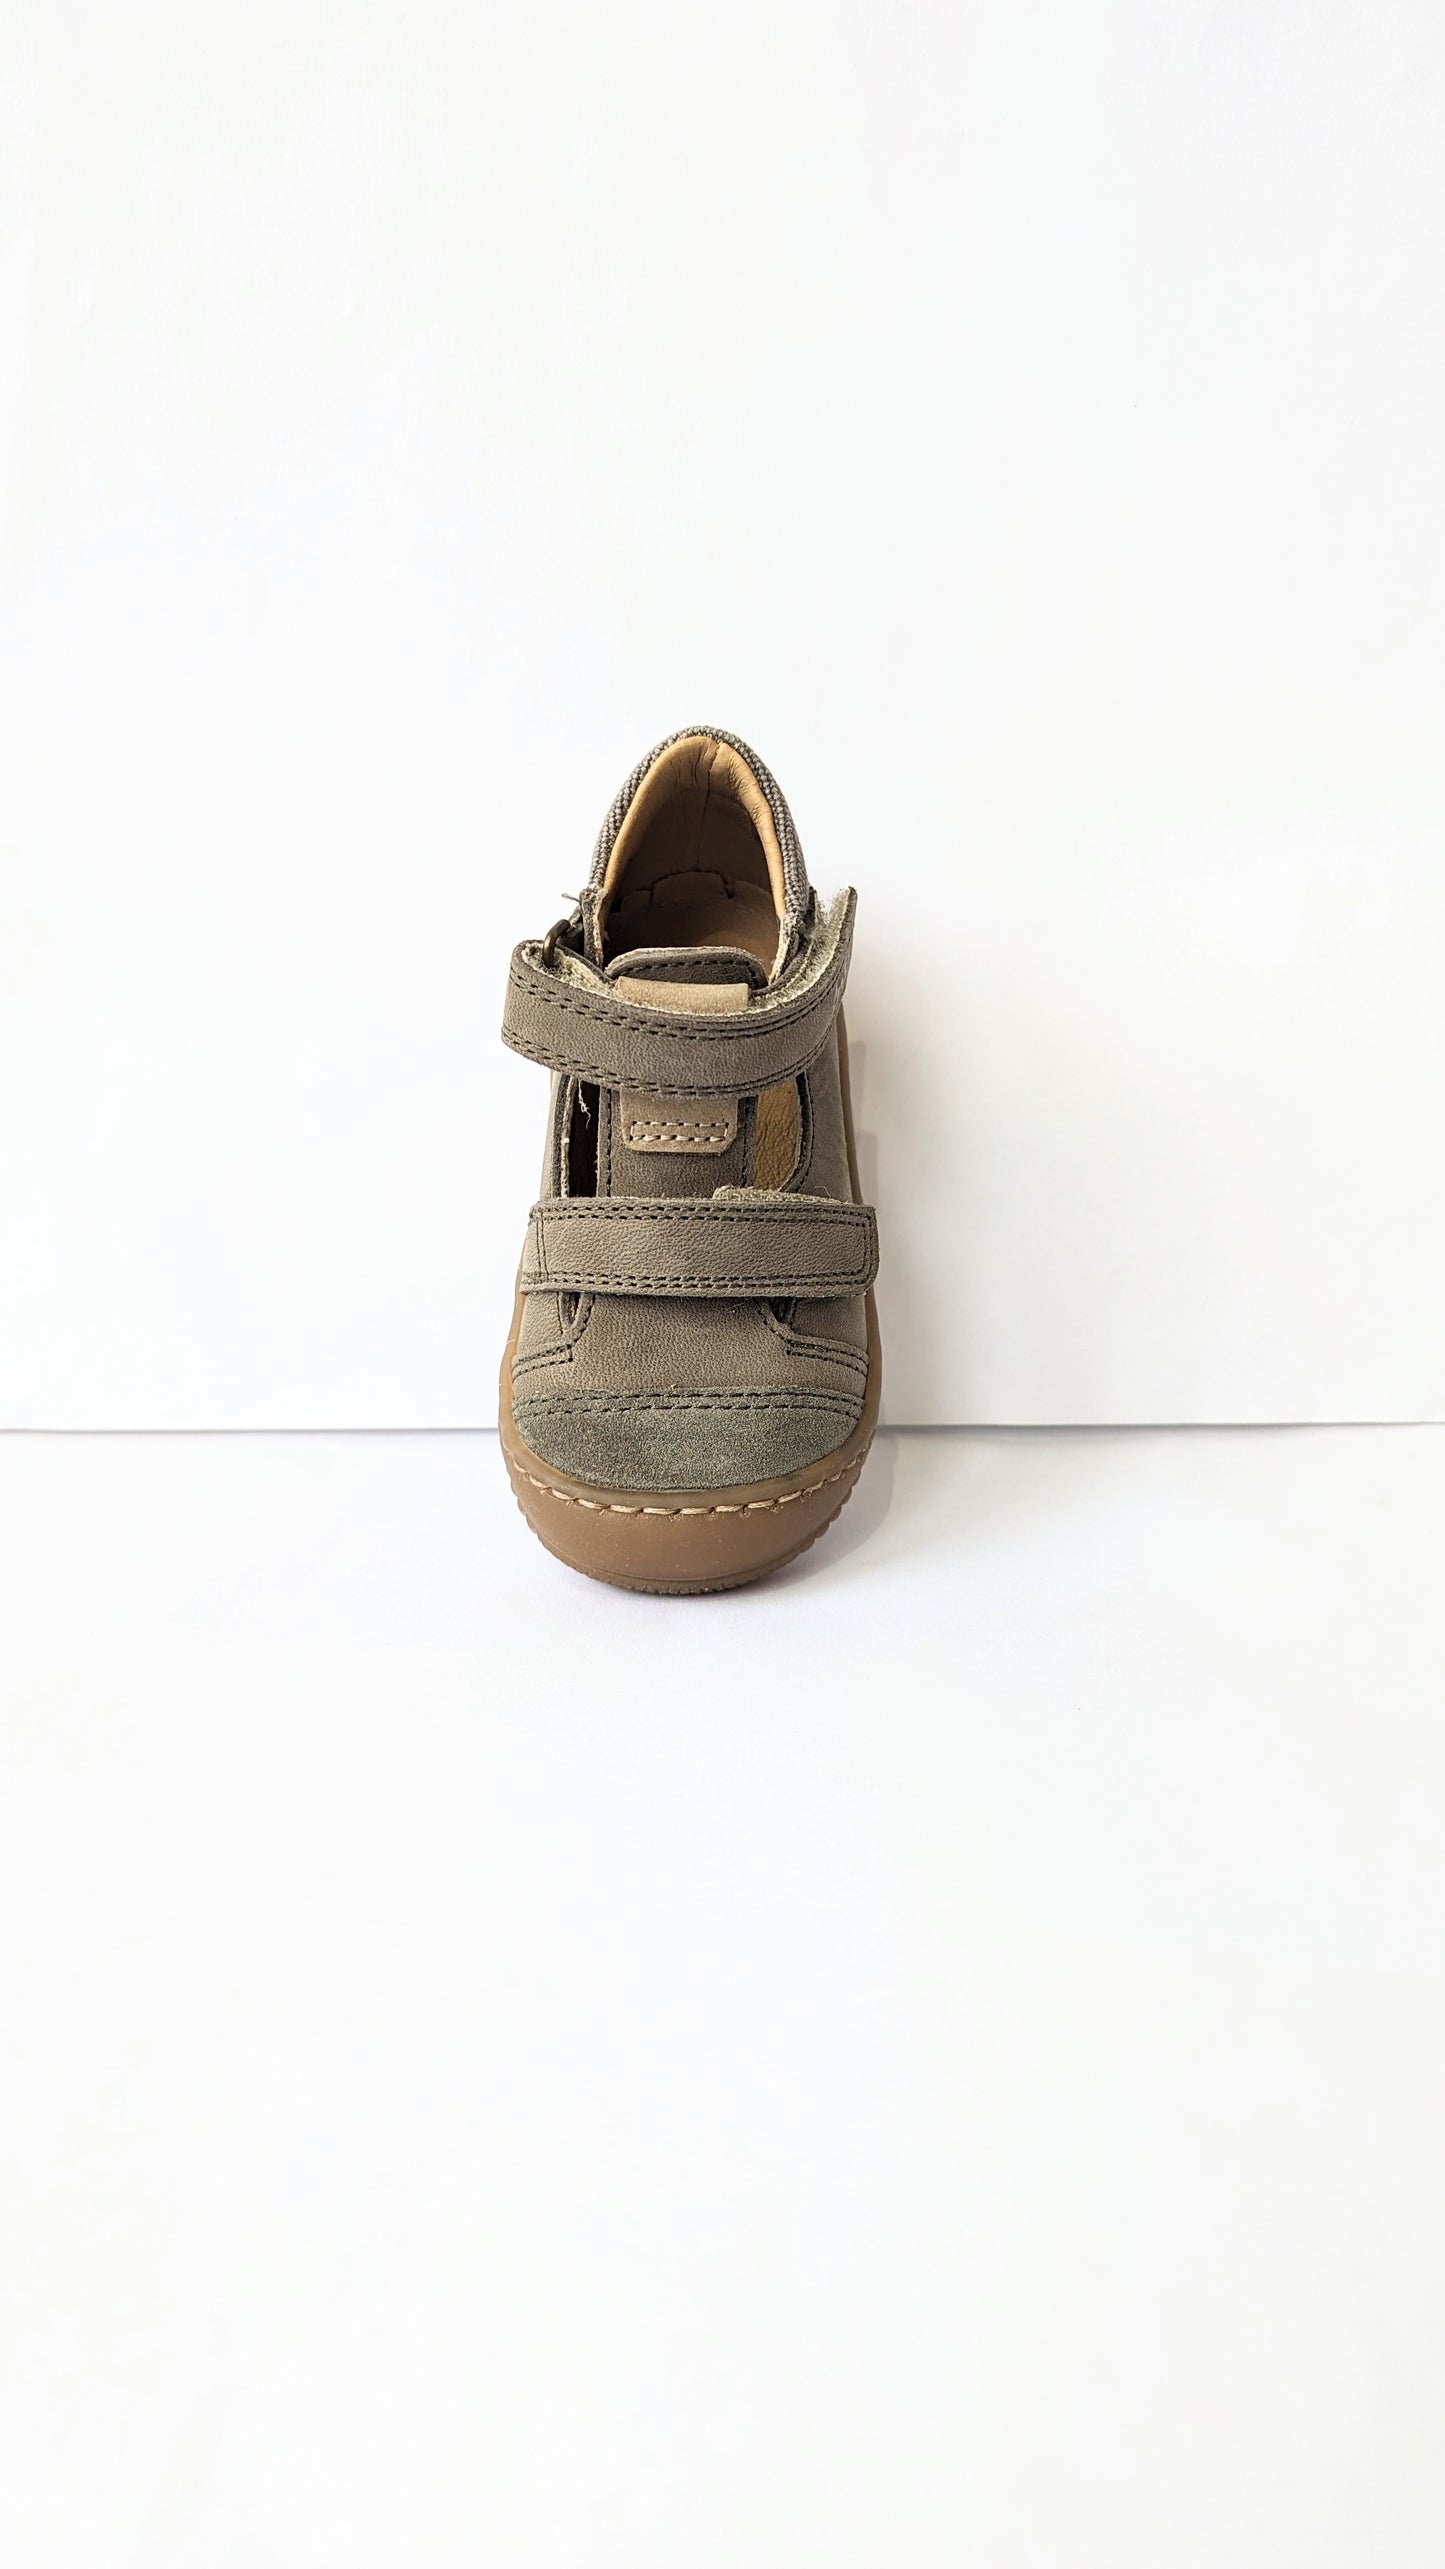 A boys shoe by Bopy, style Jacour, in khaki nubuck with double velcro fastening and toe bumper. Front view. 